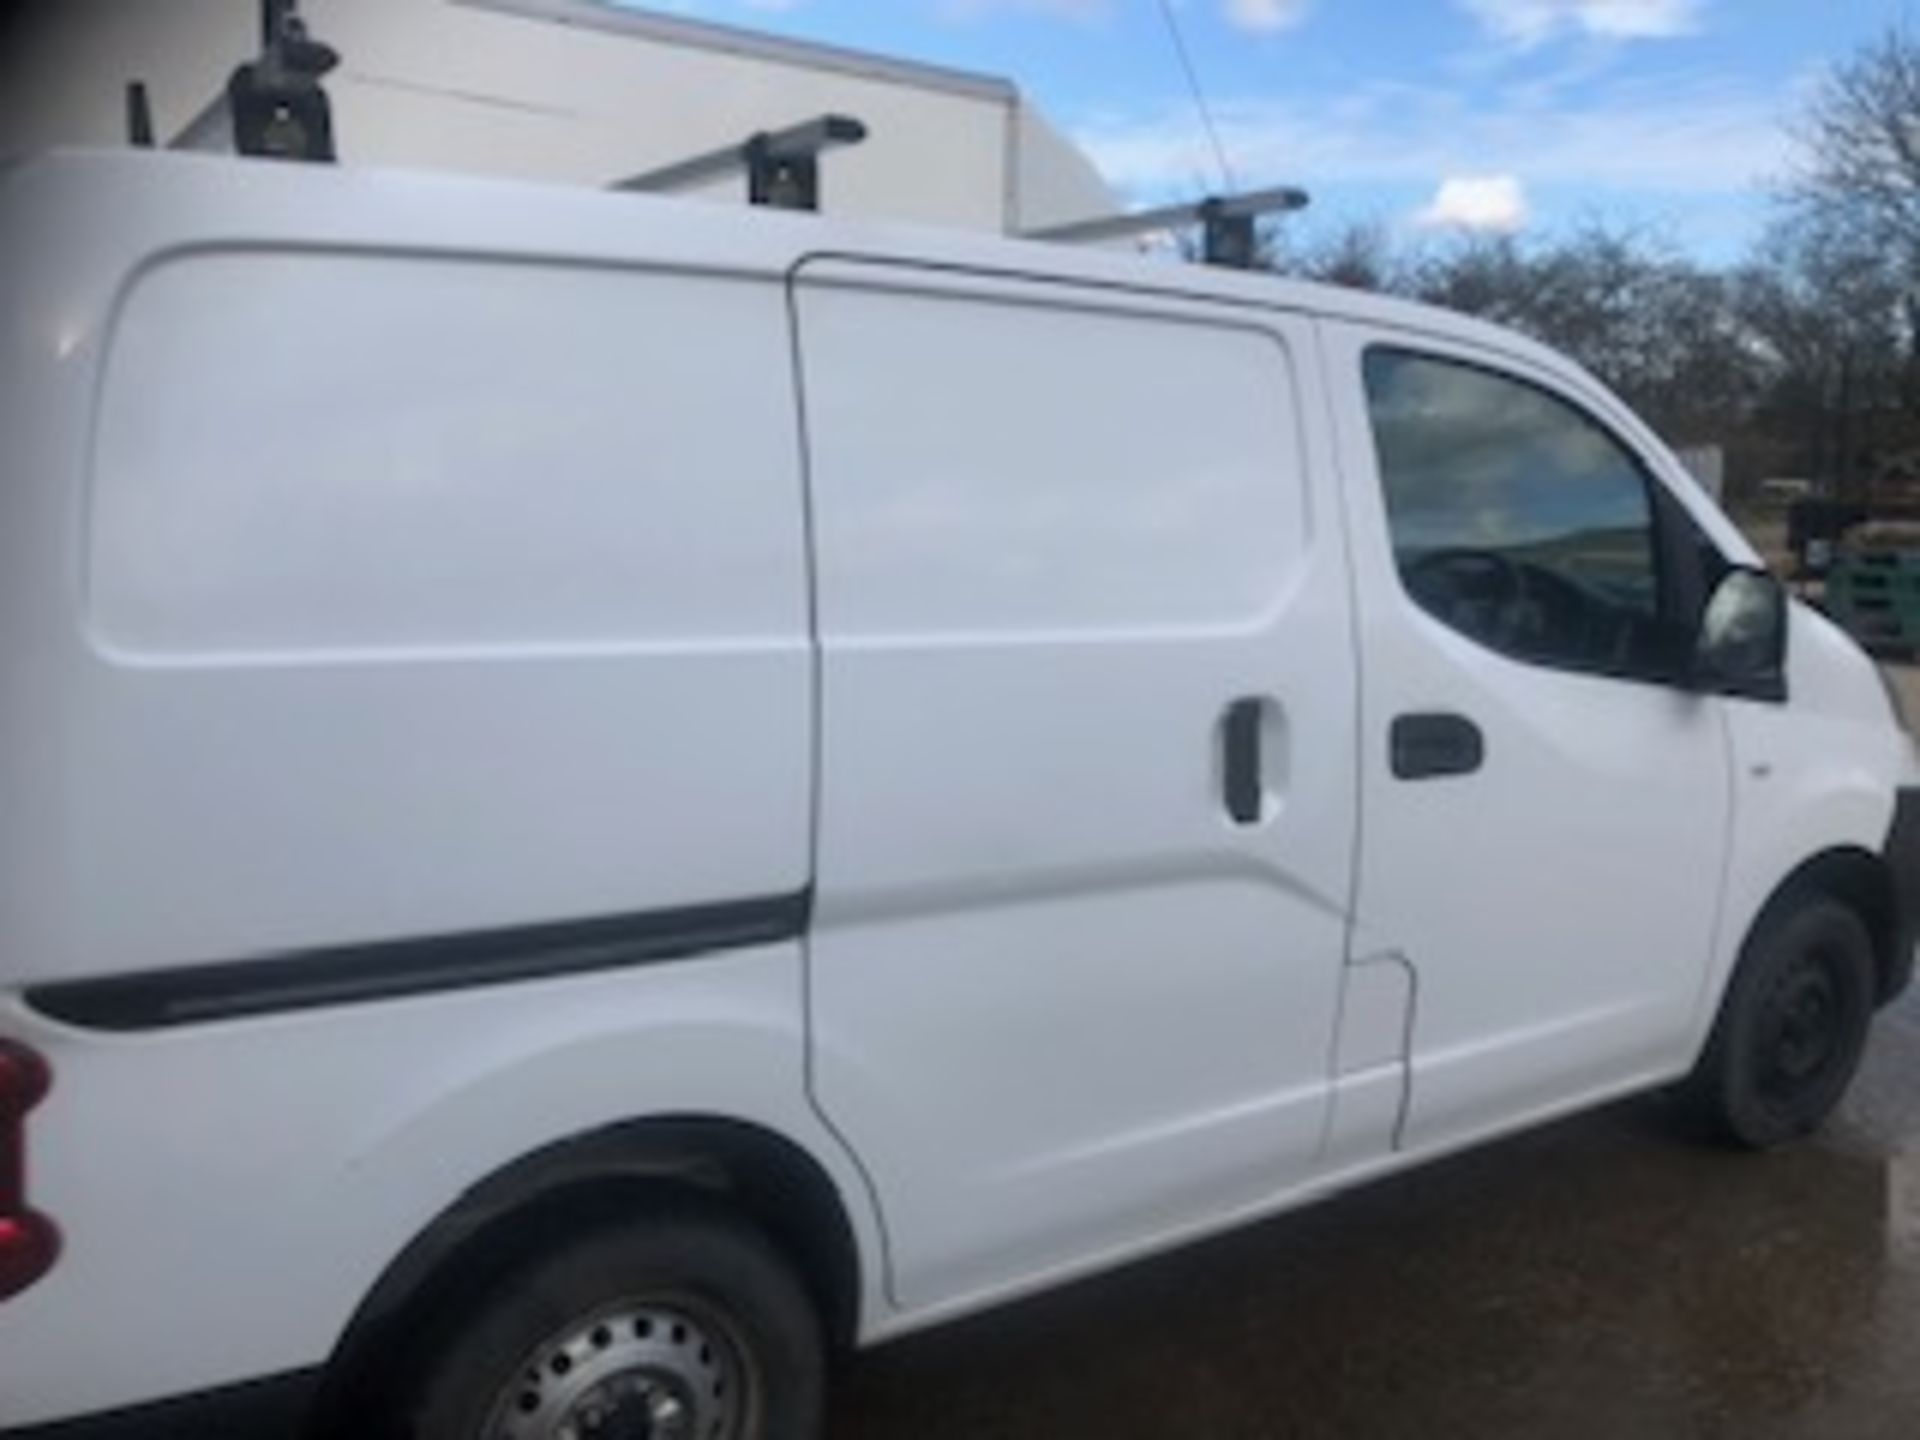 Nissan Nv200, 1.5 Dci - Image 3 of 8